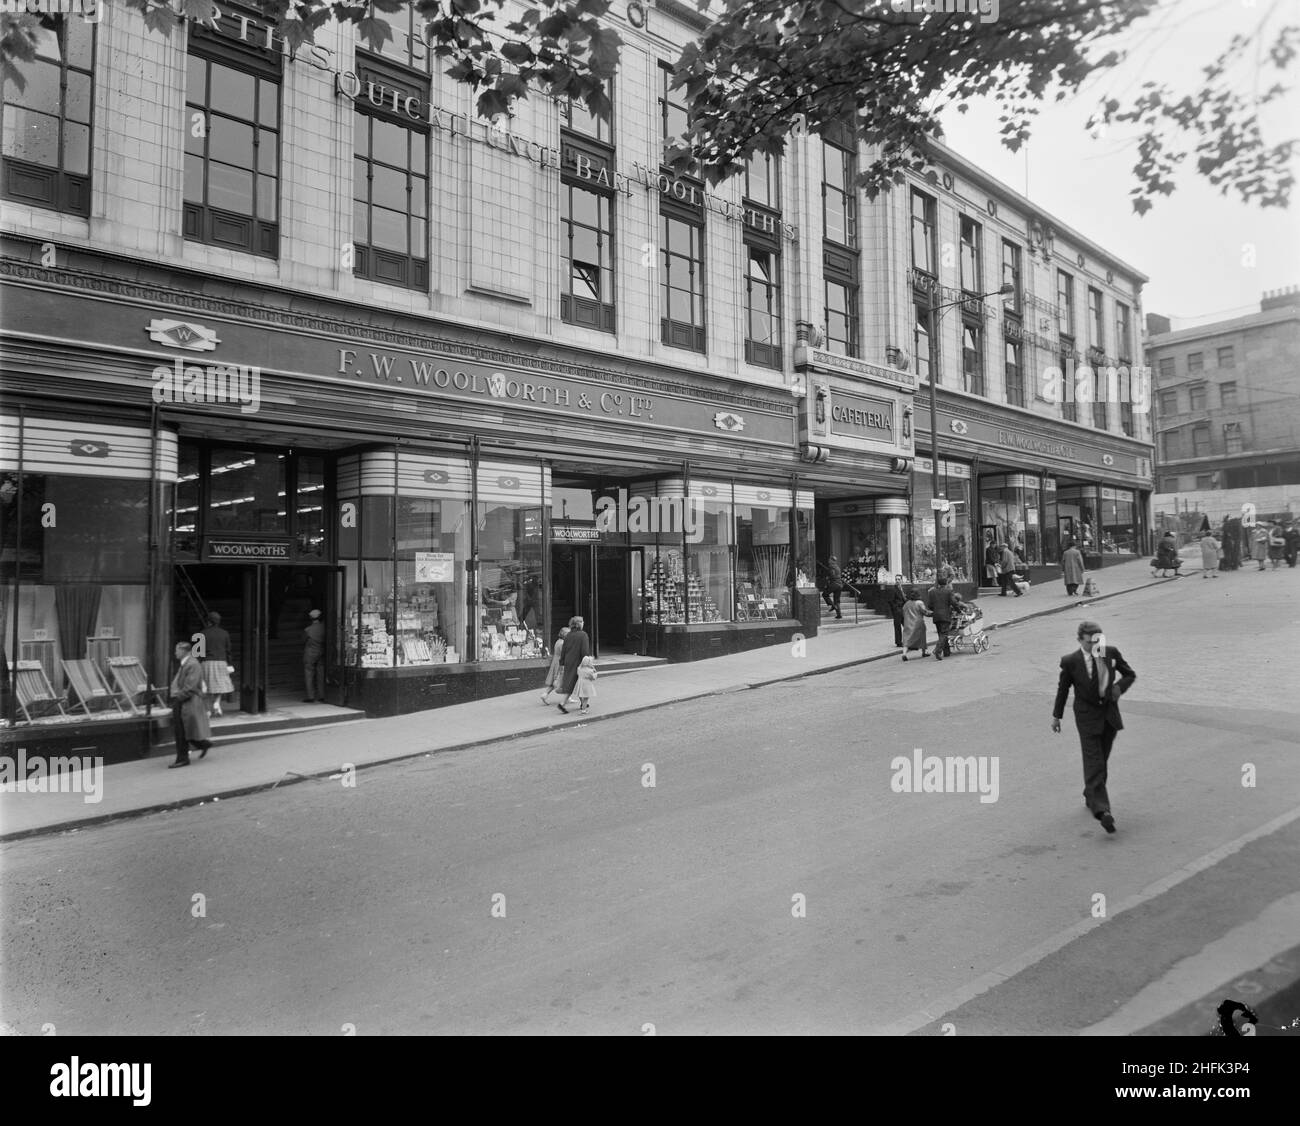 F W Woolworth and Company Limited, Bull Ring Centre, Birmingham, 24/05/1961. Exterior view of the F W Woolworth &amp; Co on Spiceal Street, prior to its redevelopment as part of the Bull Ring Shopping Centre. The caption beneath the corresponding album print reads 'Bull Ring Centre, Birmingham. East Court'. Stock Photo